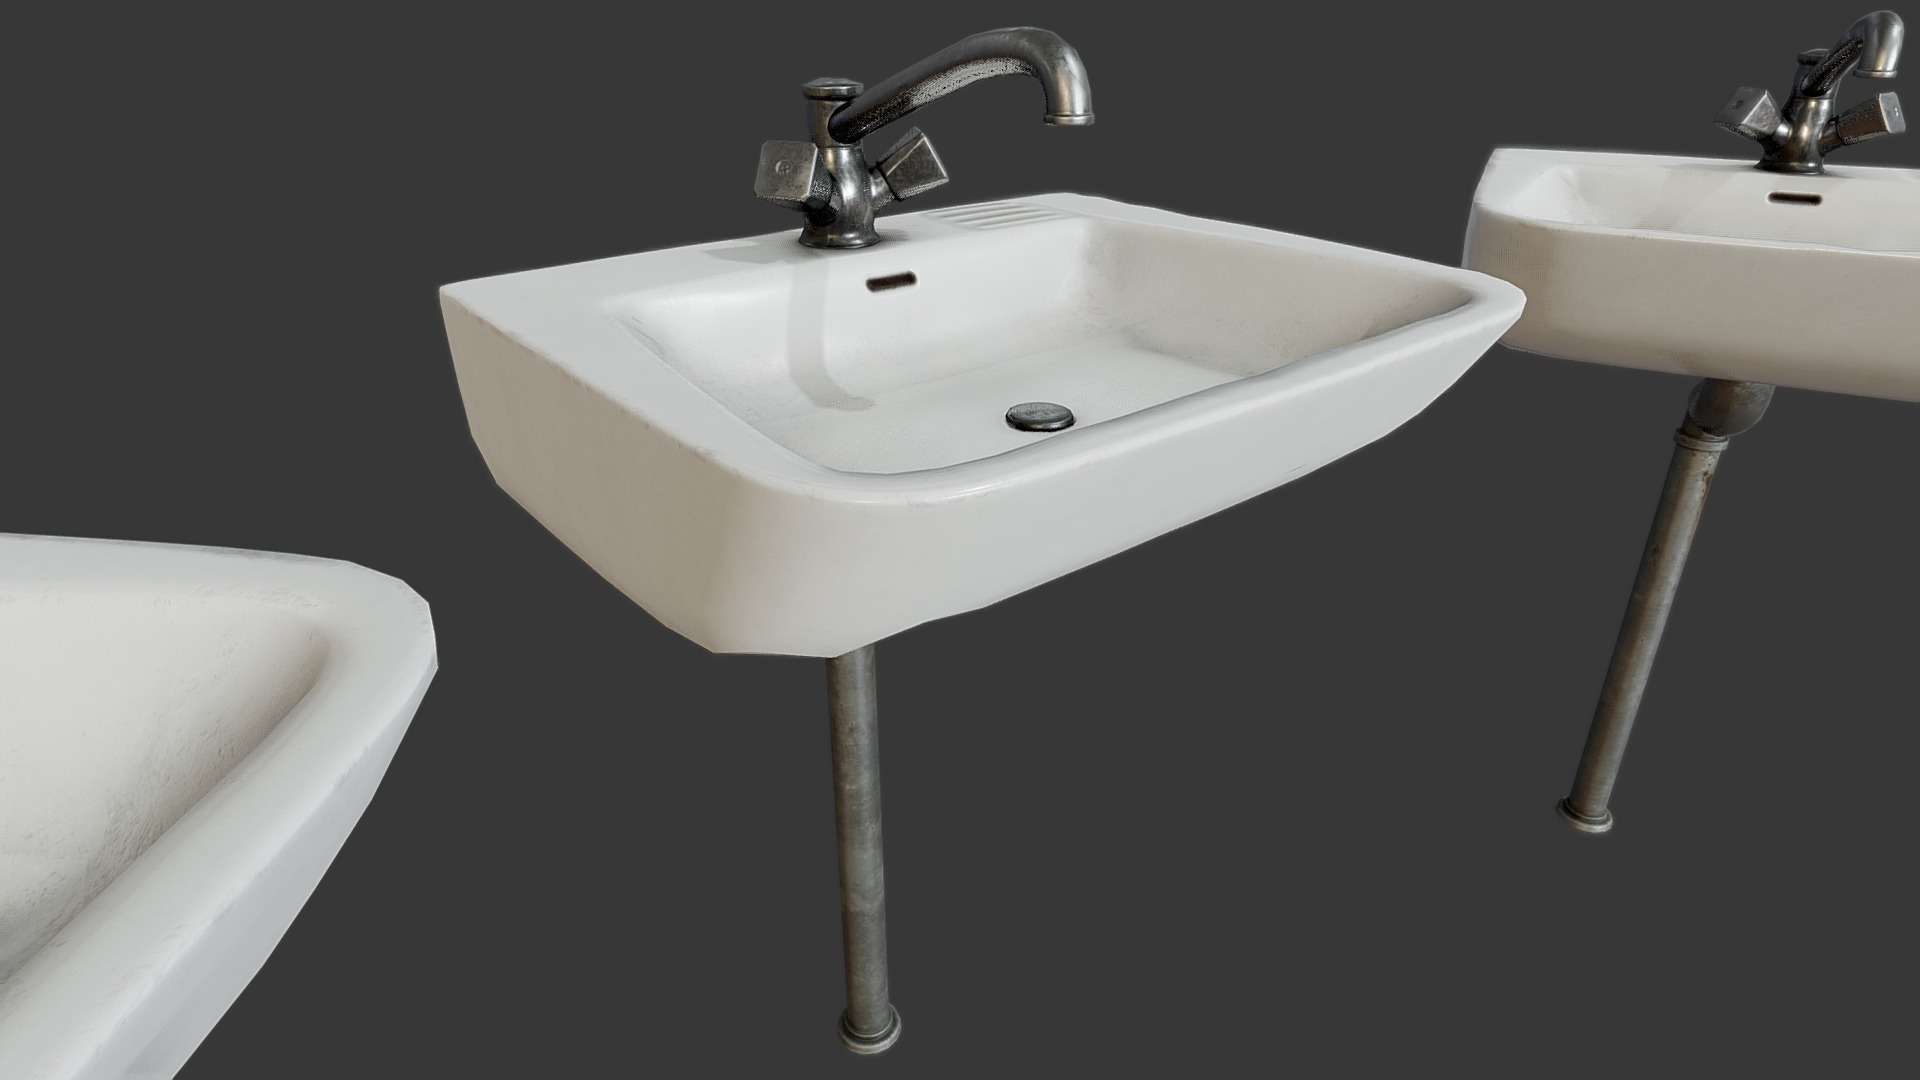 3D model Sink PBR - This is a 3D model of the Sink PBR. The 3D model is about a group of white sinks.